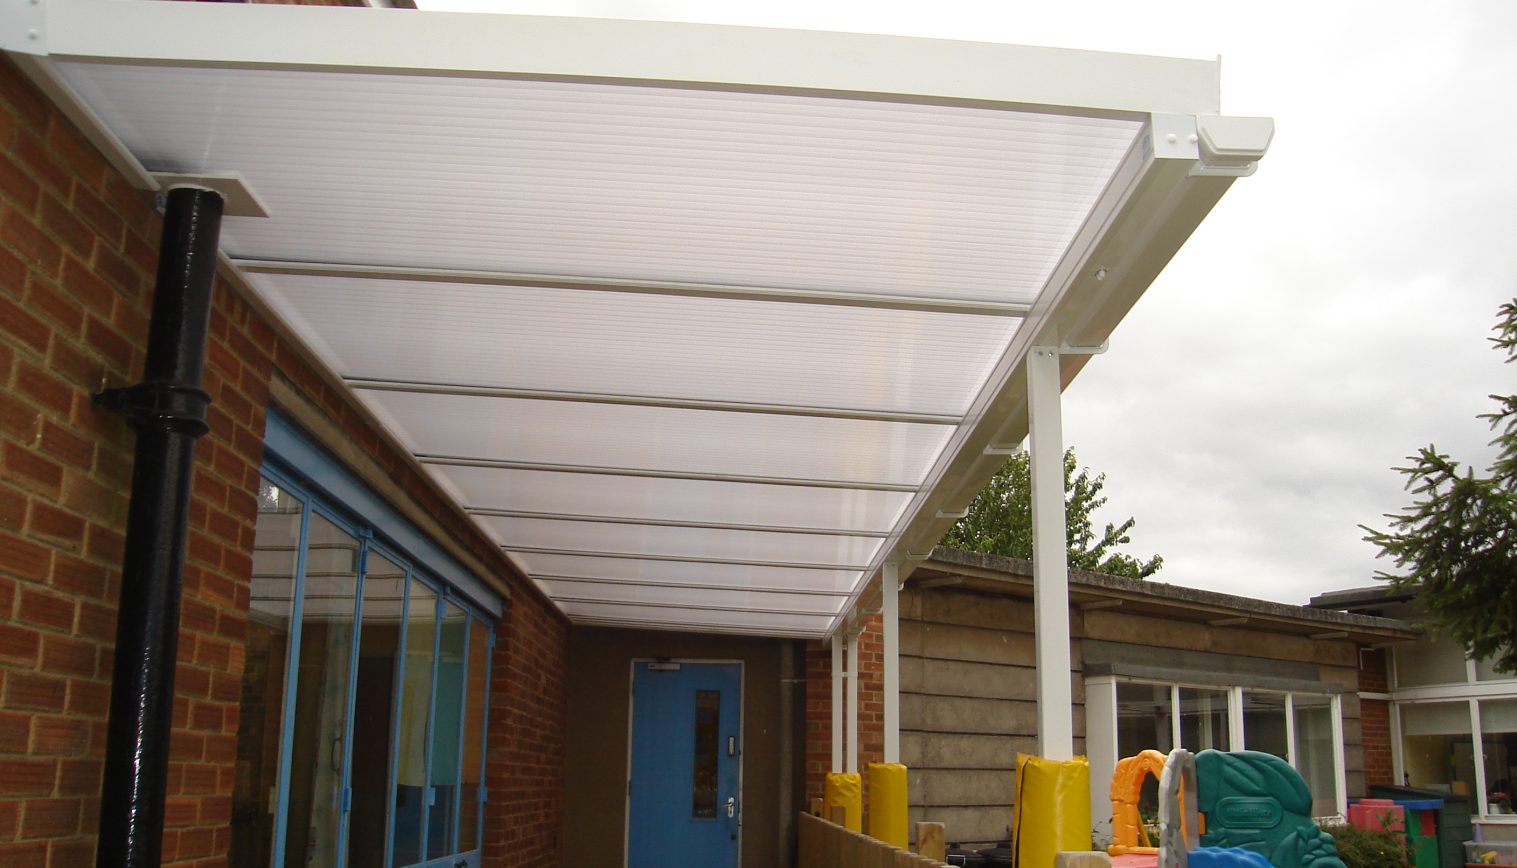 Rushmere Hall Primary School – x3 Wall Mounted Canopies